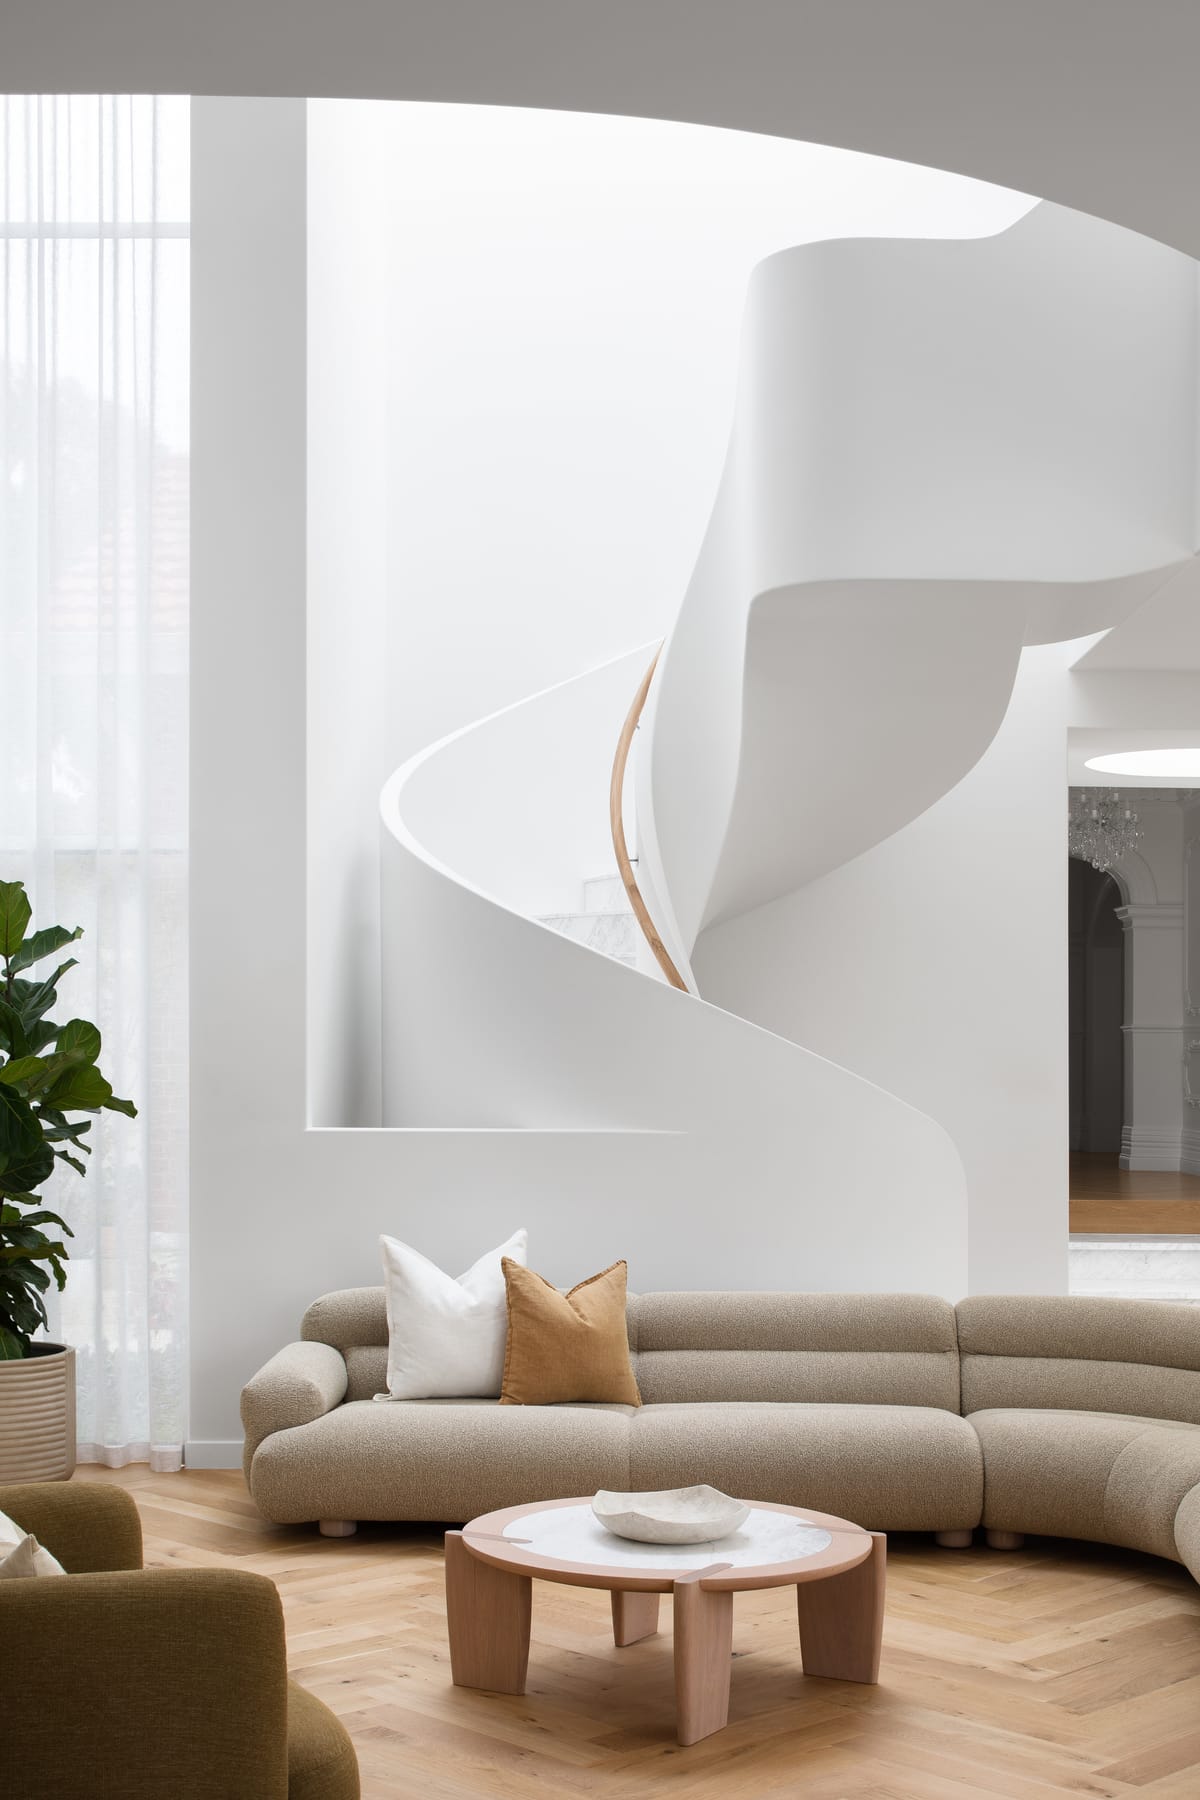 The Grove by Taouk Architects. Living room with curved seating in foreground spiral staircase in backgroun